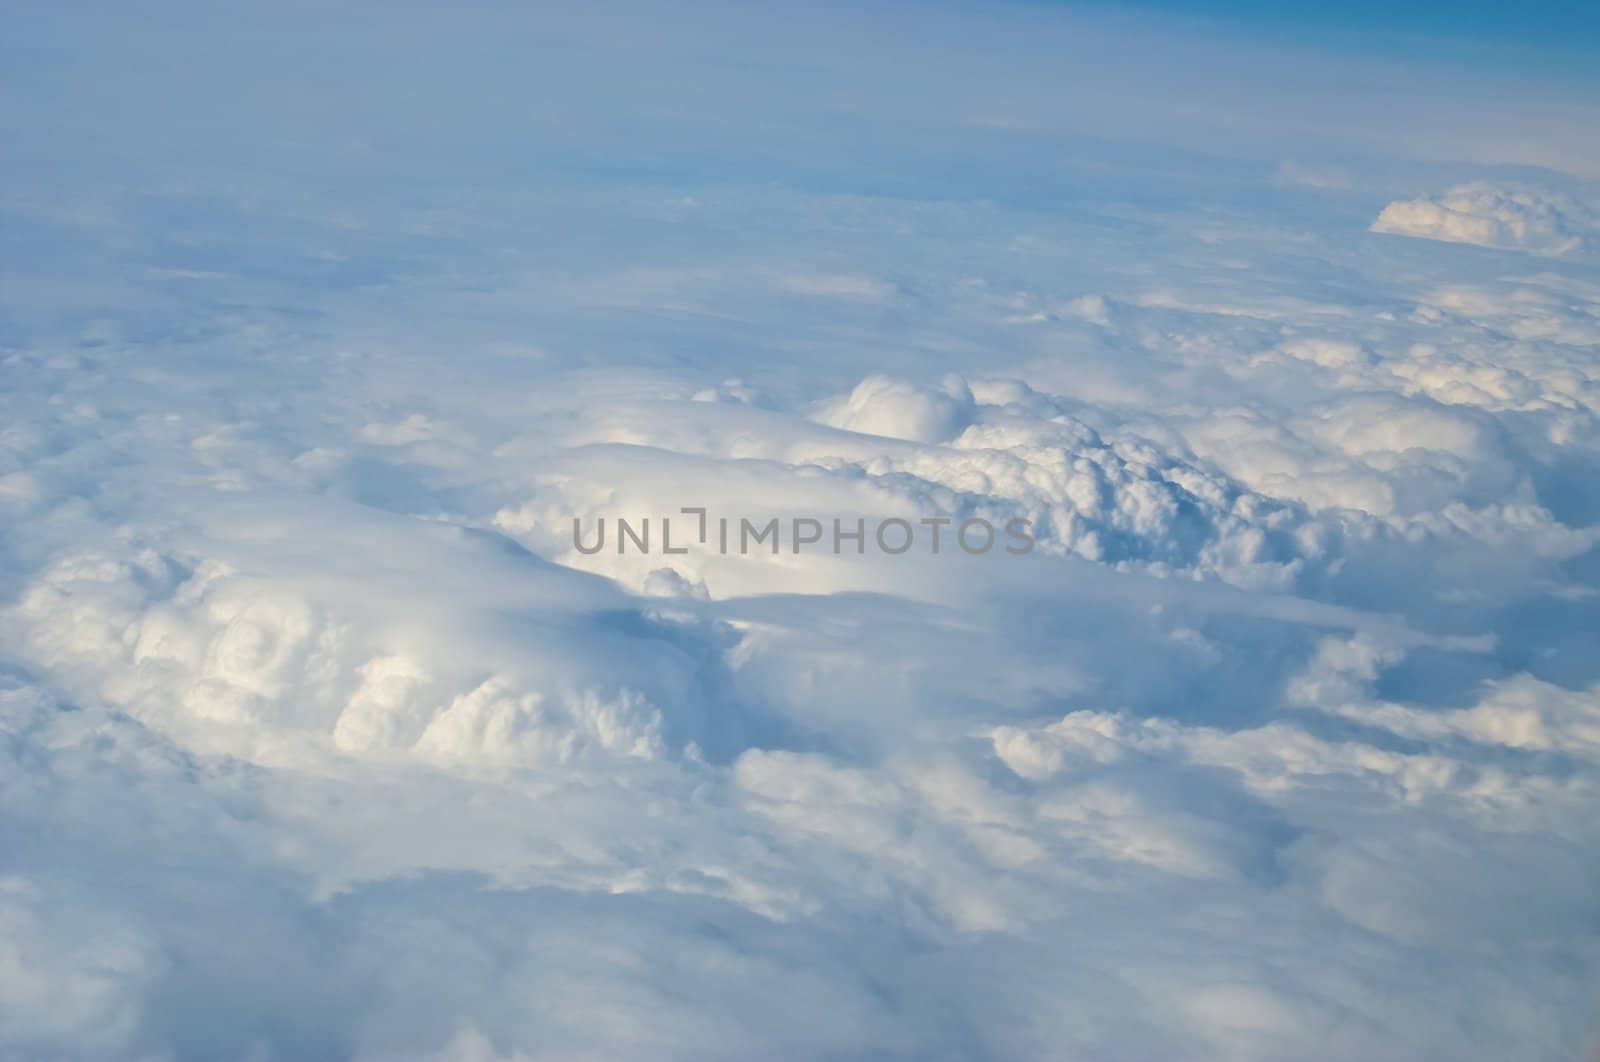 View of white cloud formations